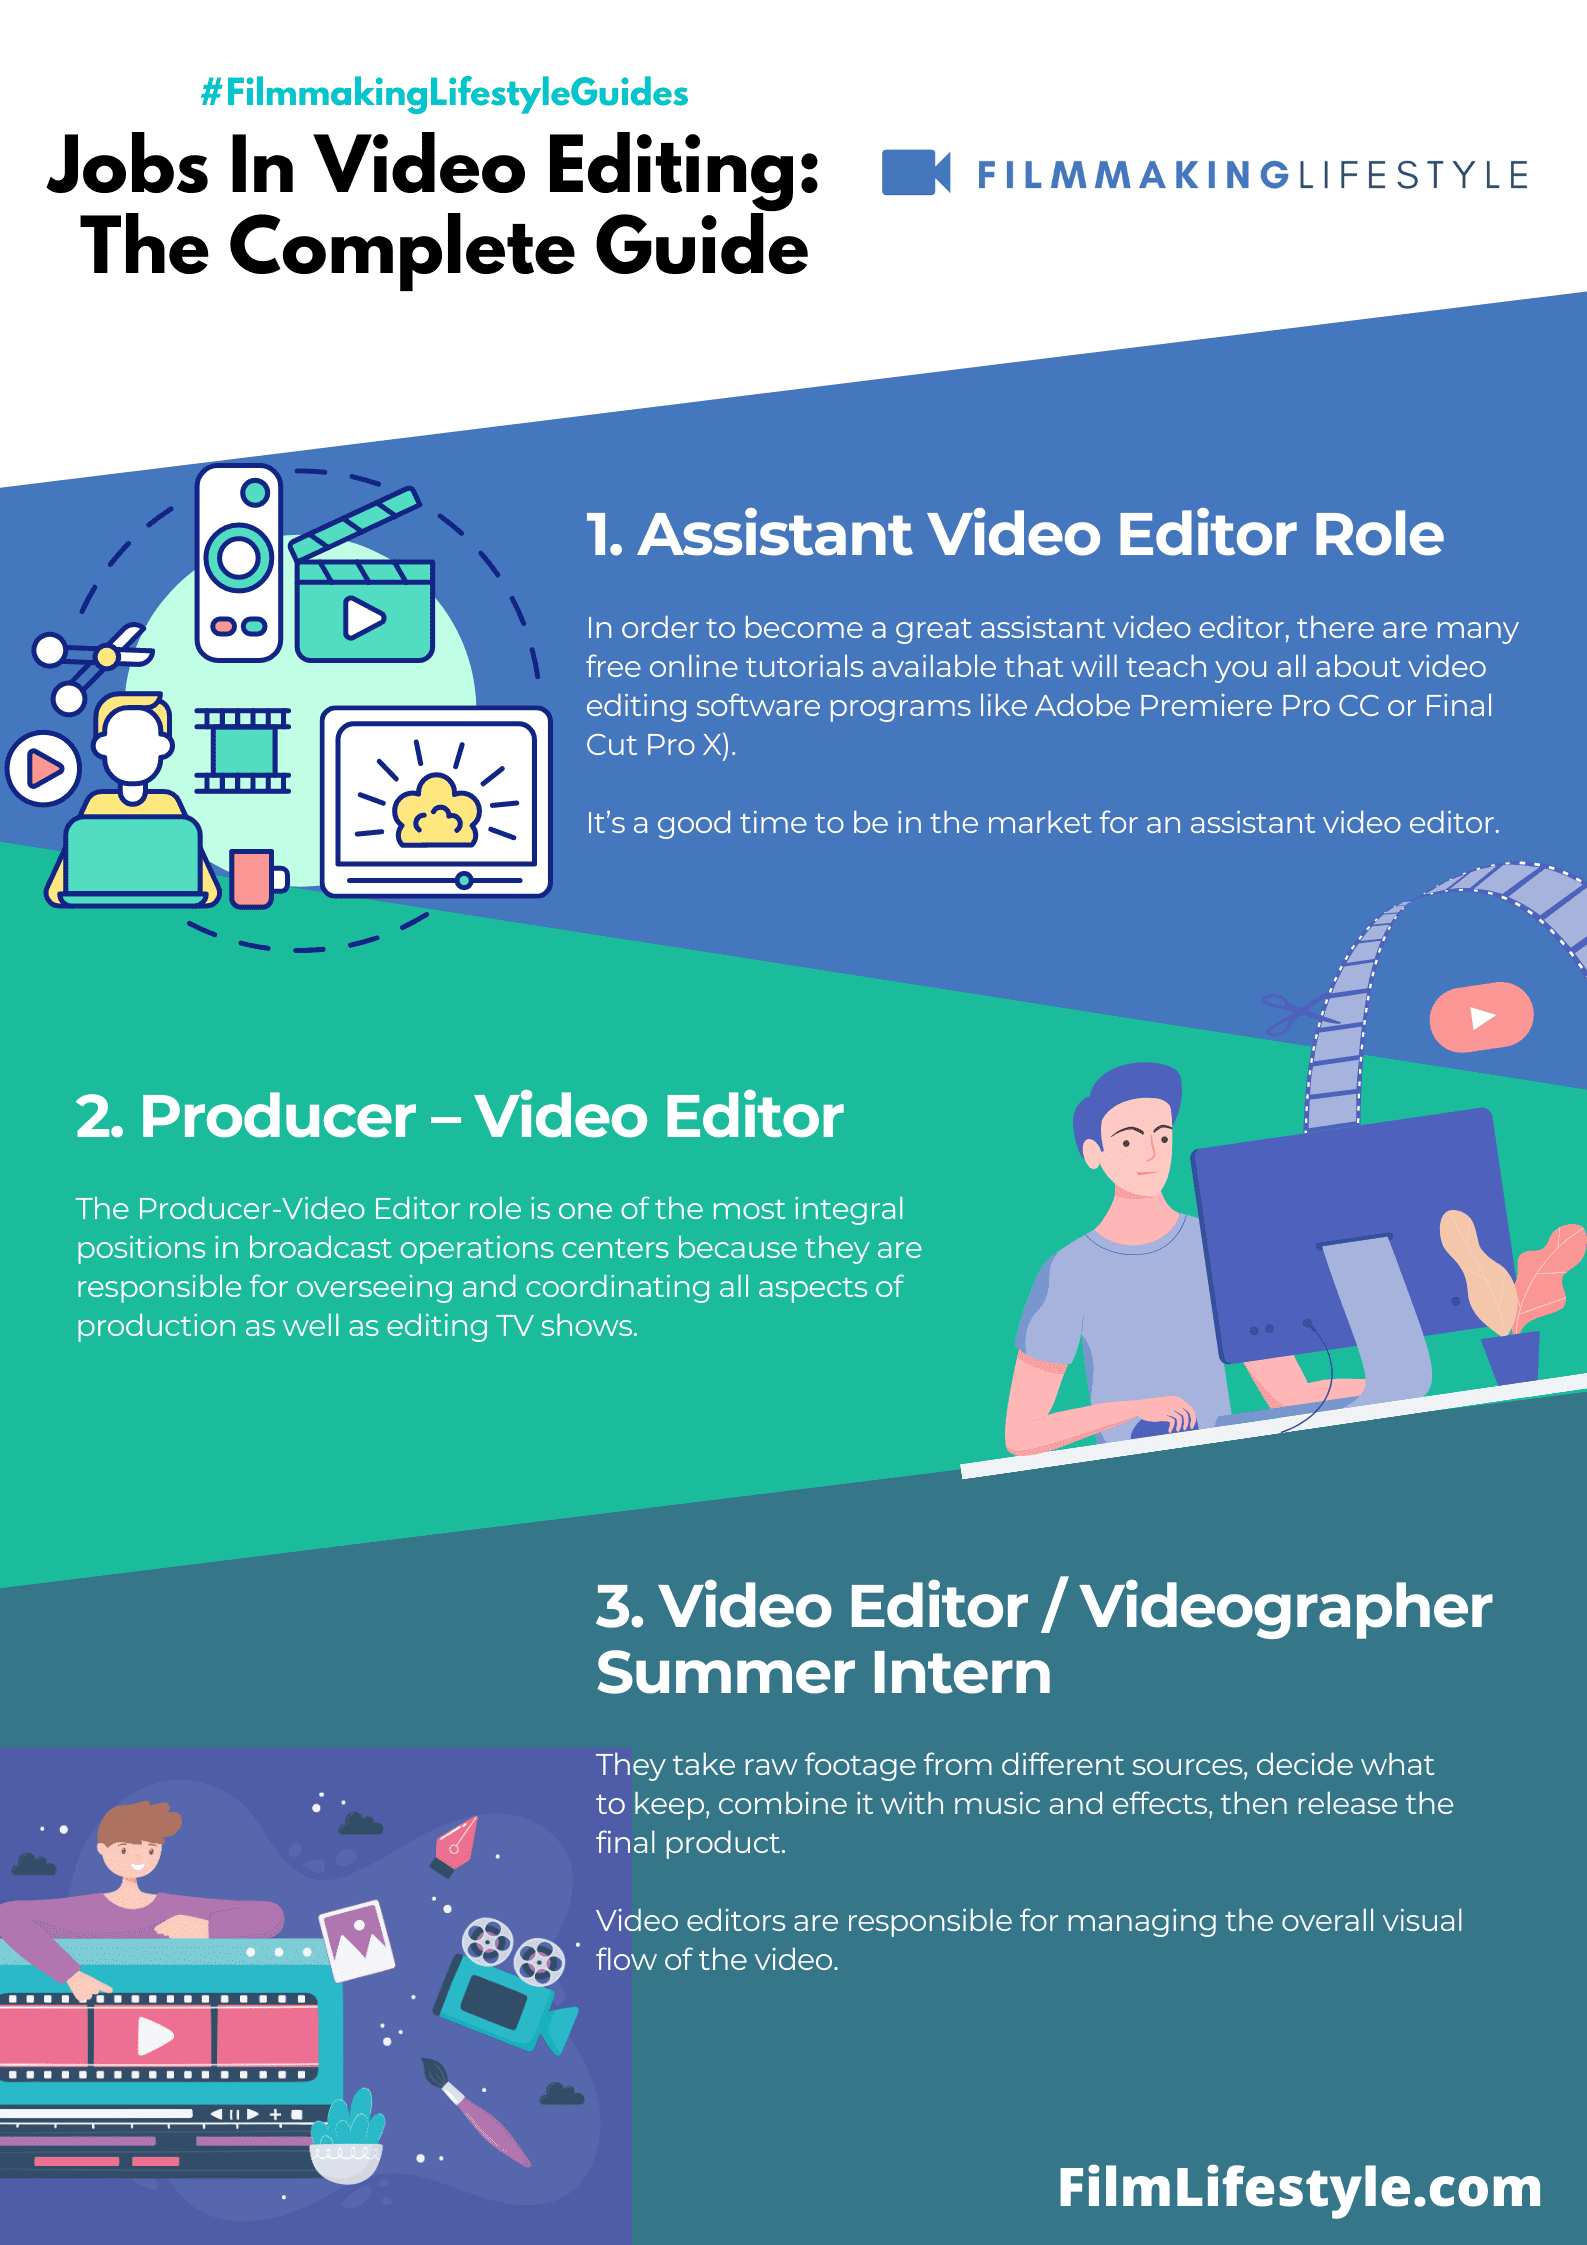 Jobs In Video Editing